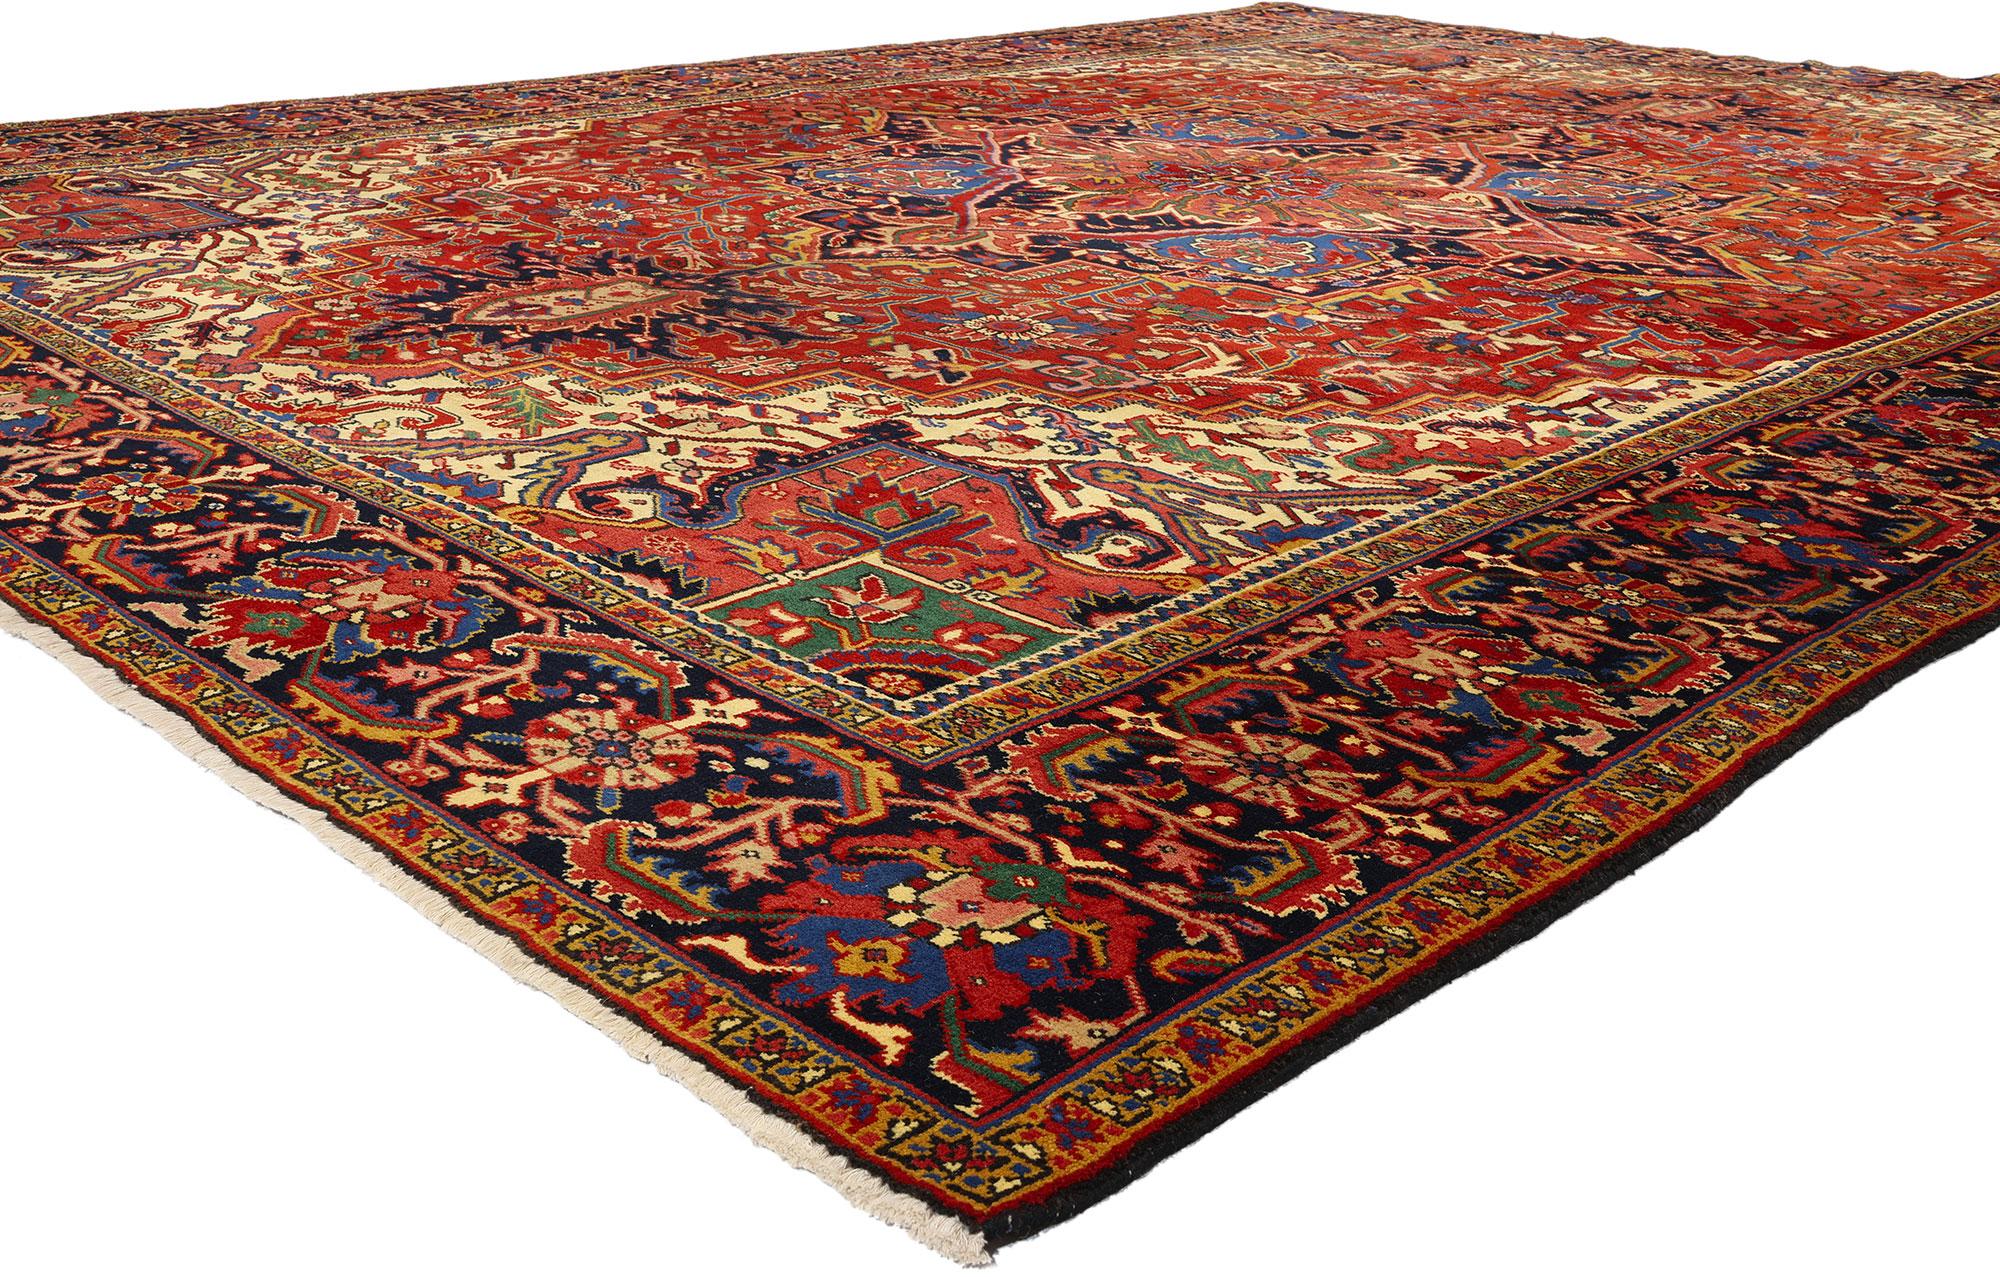 81069 Vintage Persian Heriz Rug, 09'11 x 13'00. Originating from the Heris region in northwest Iran, Persian Heriz rugs are renowned for their precise geometric patterns and meticulous motif outlining. These rugs are crafted using premium wool